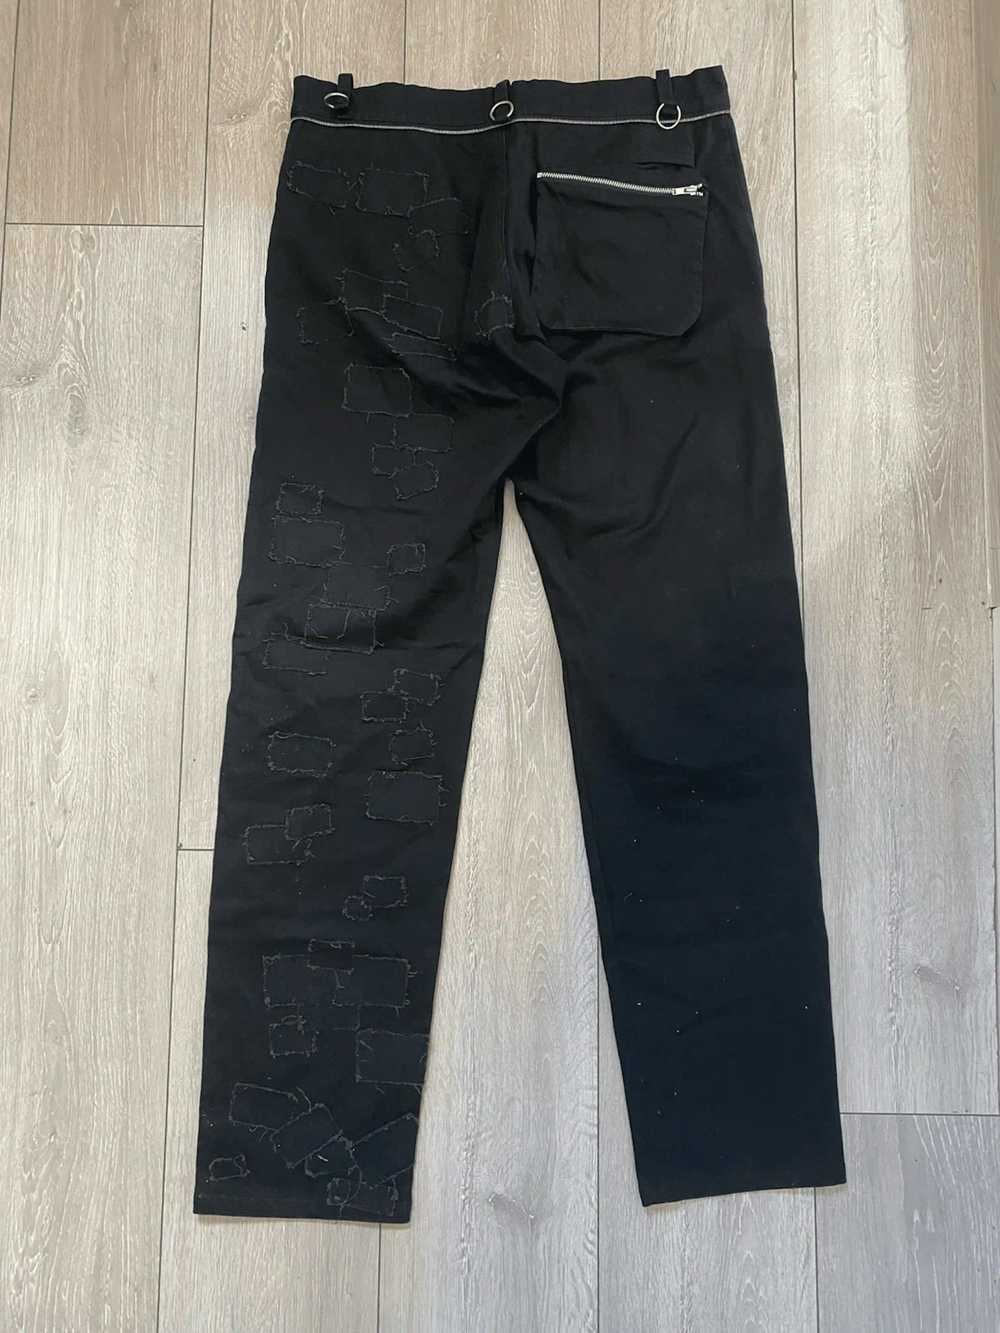 Undercover Undercover SS03 Scab Pants Patchwork - image 2